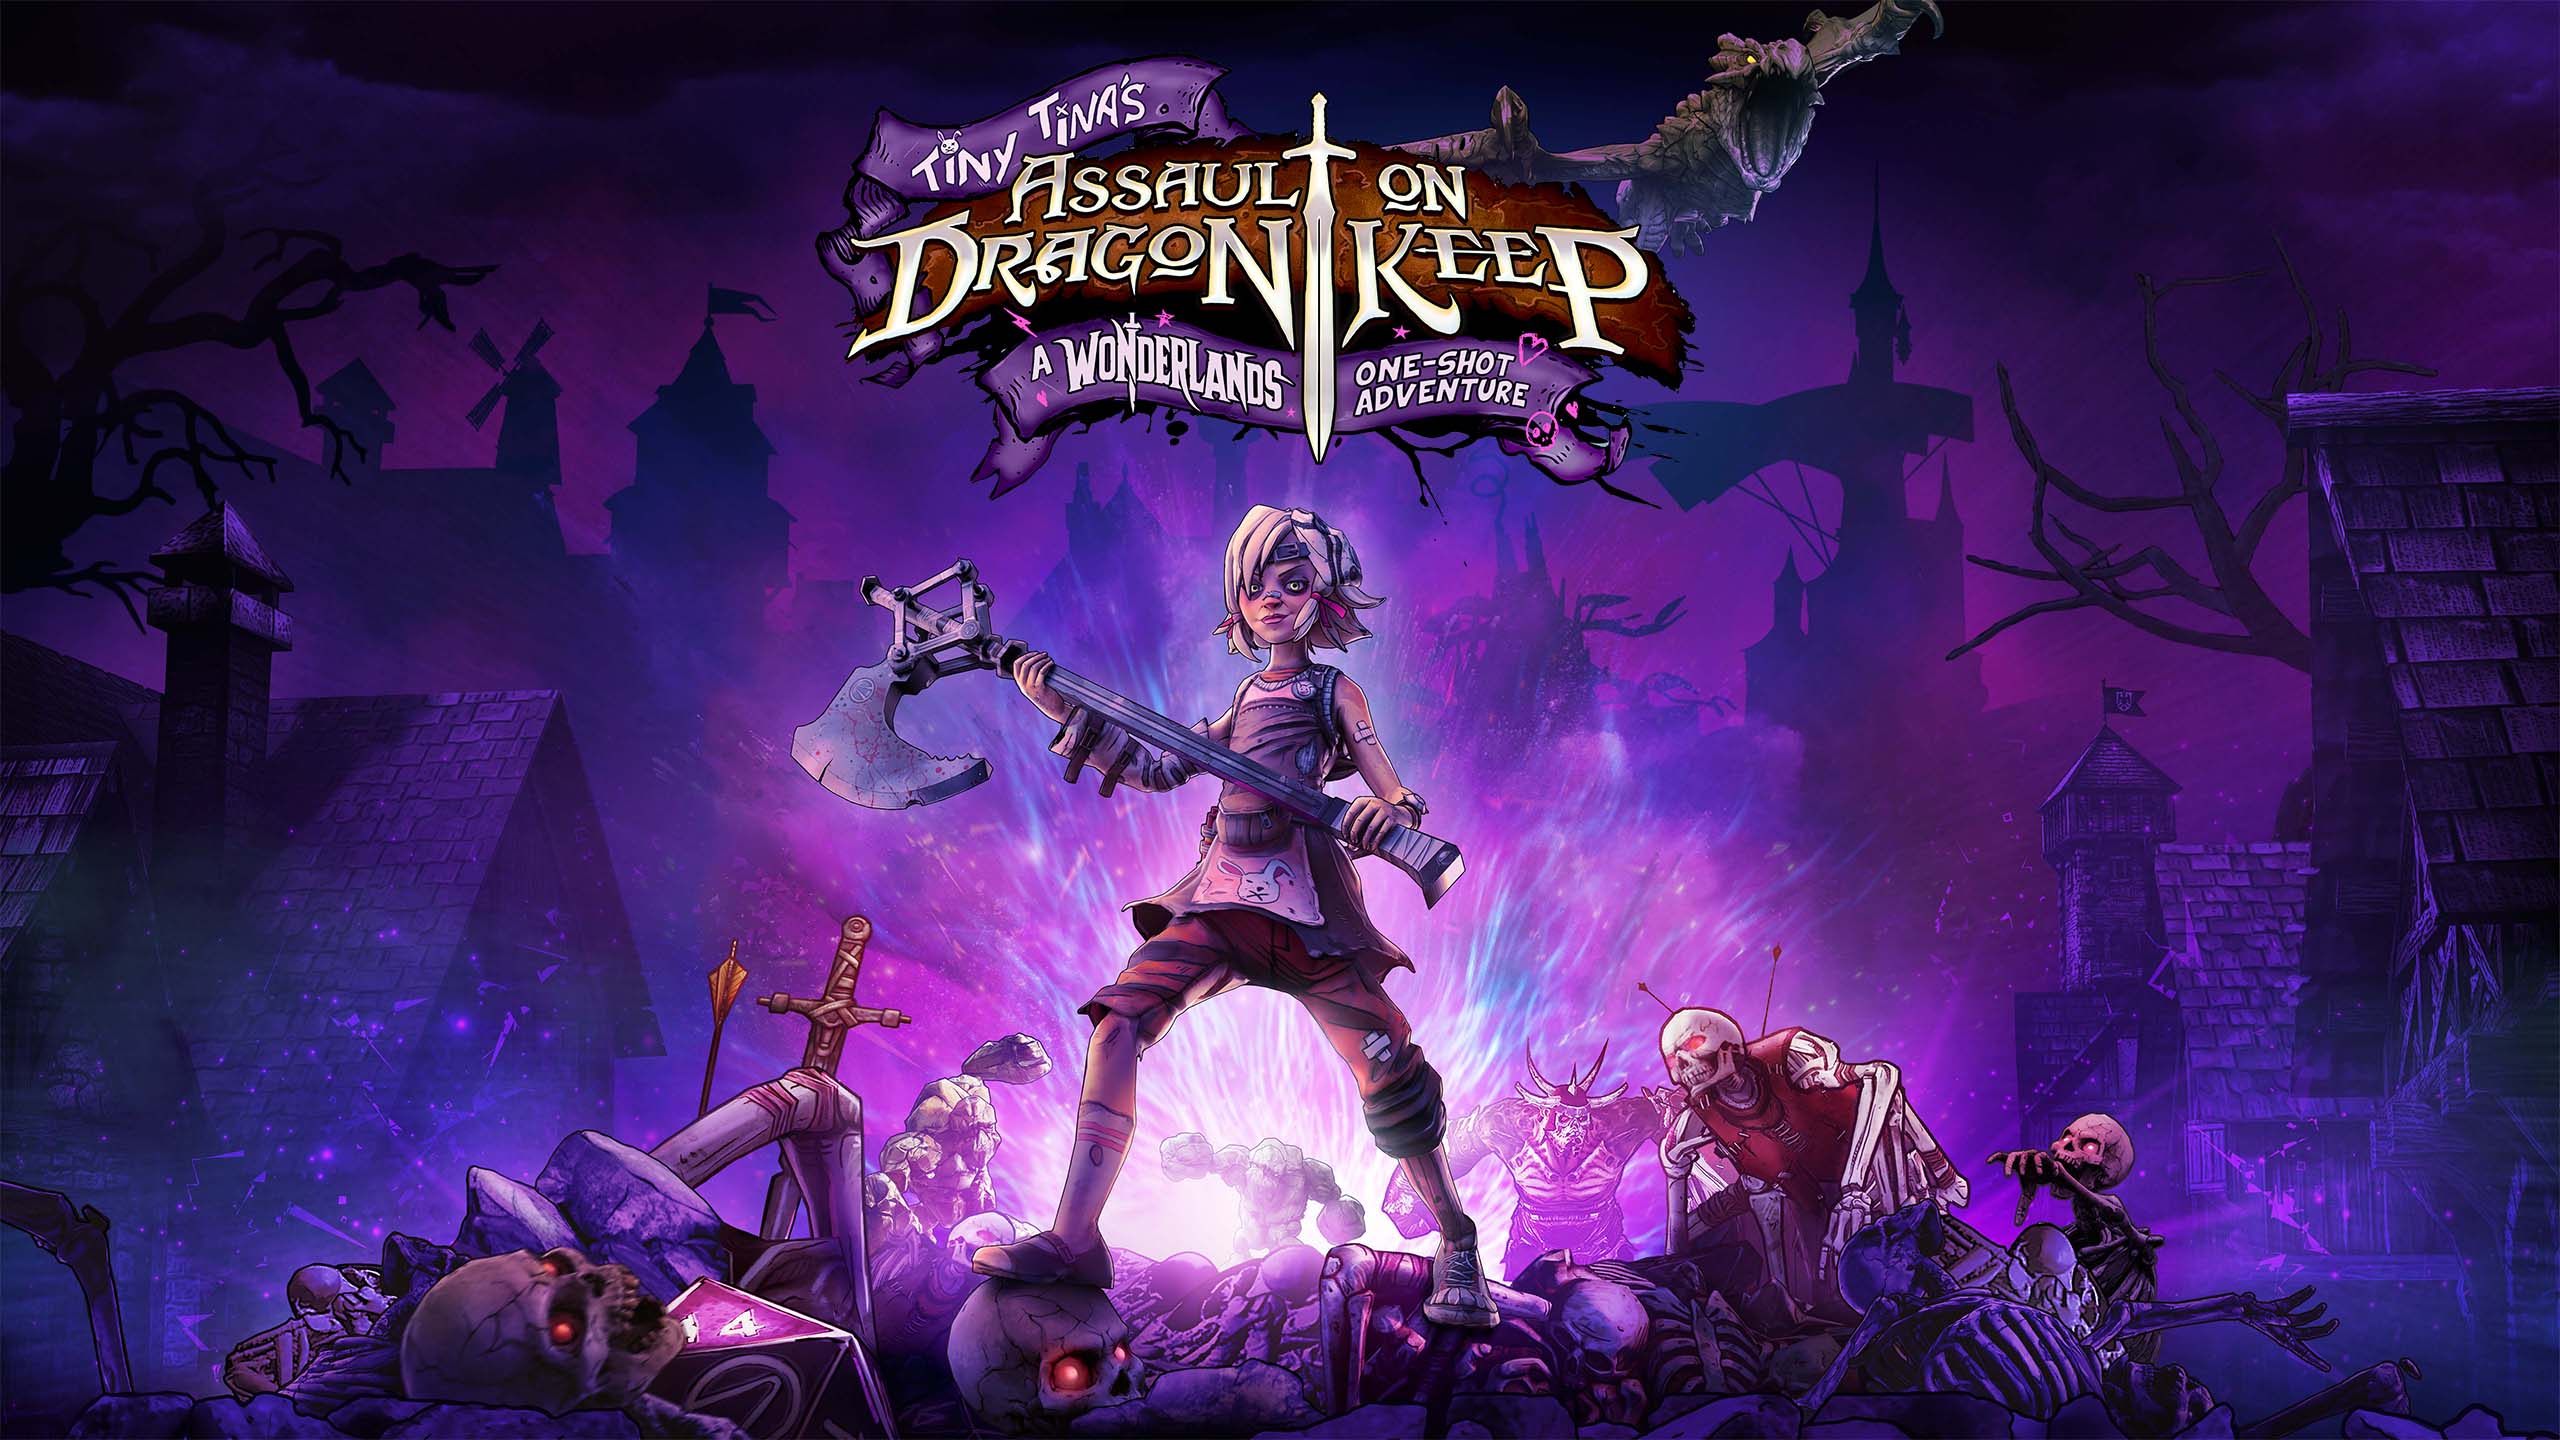 Tiny Tina's Wonderland - Assault on Dragon Keep is available for free at Epic Games Store